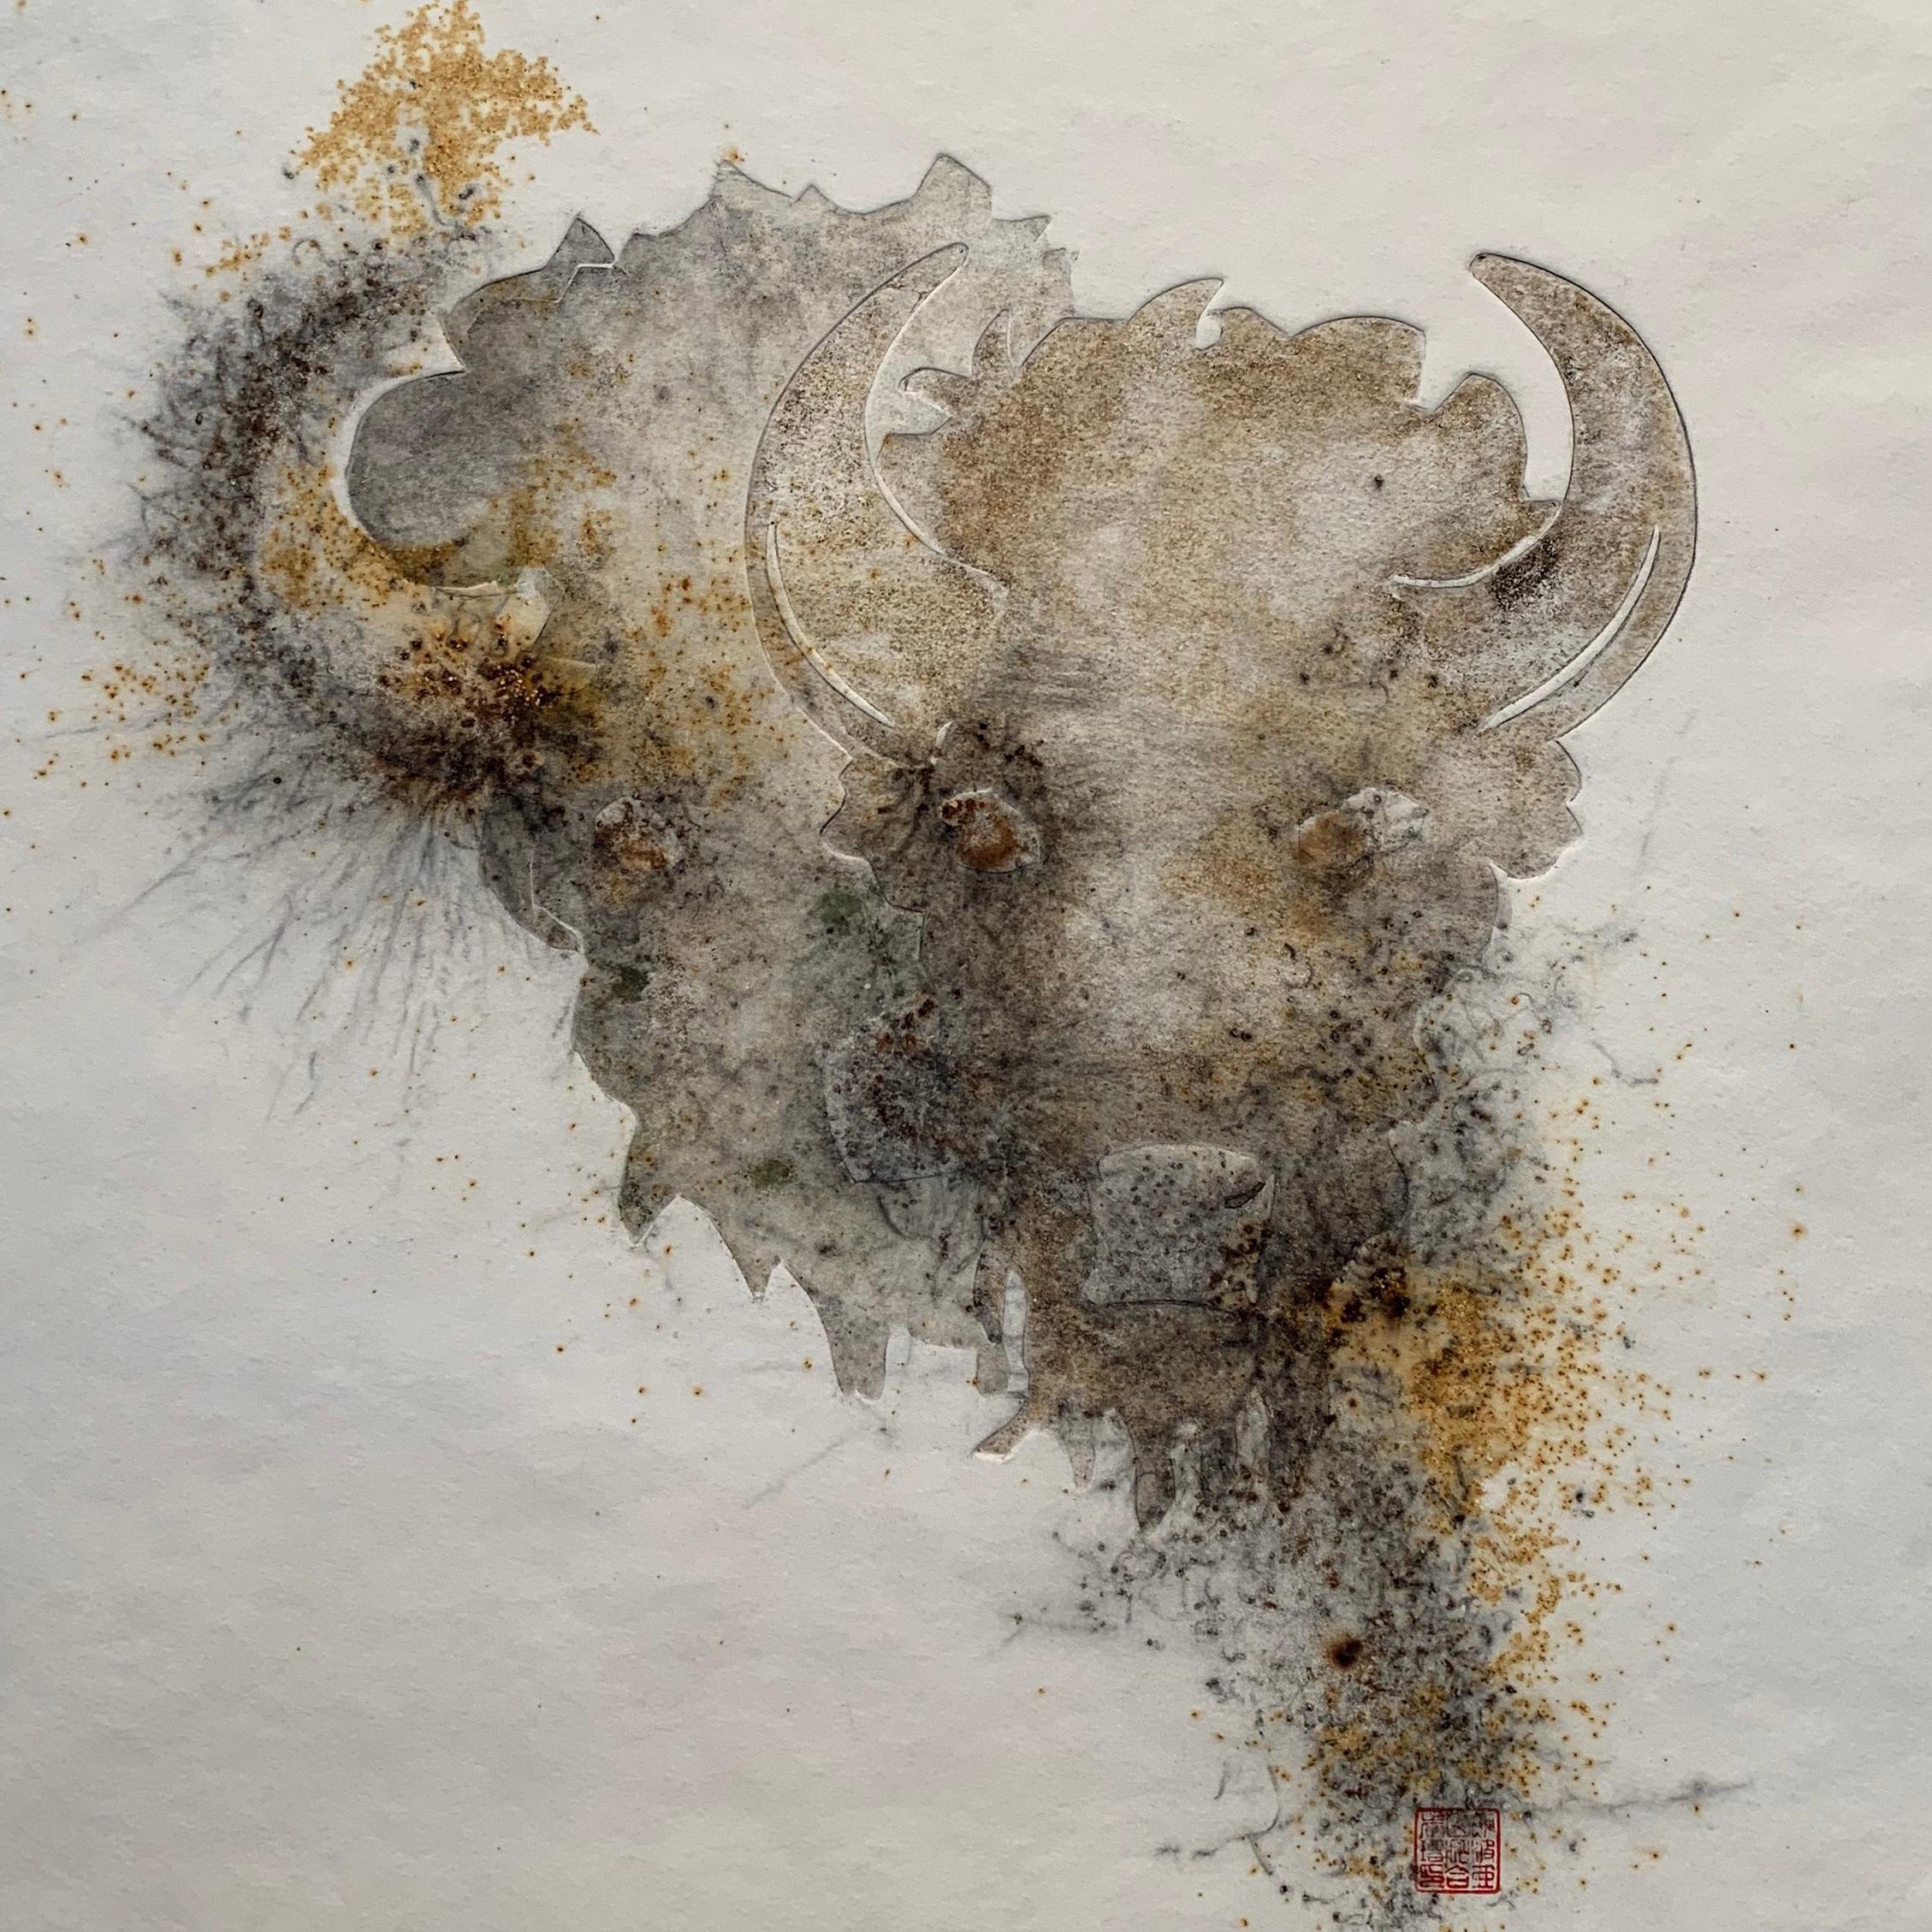 TWO HEADS  American Bison Series.  24